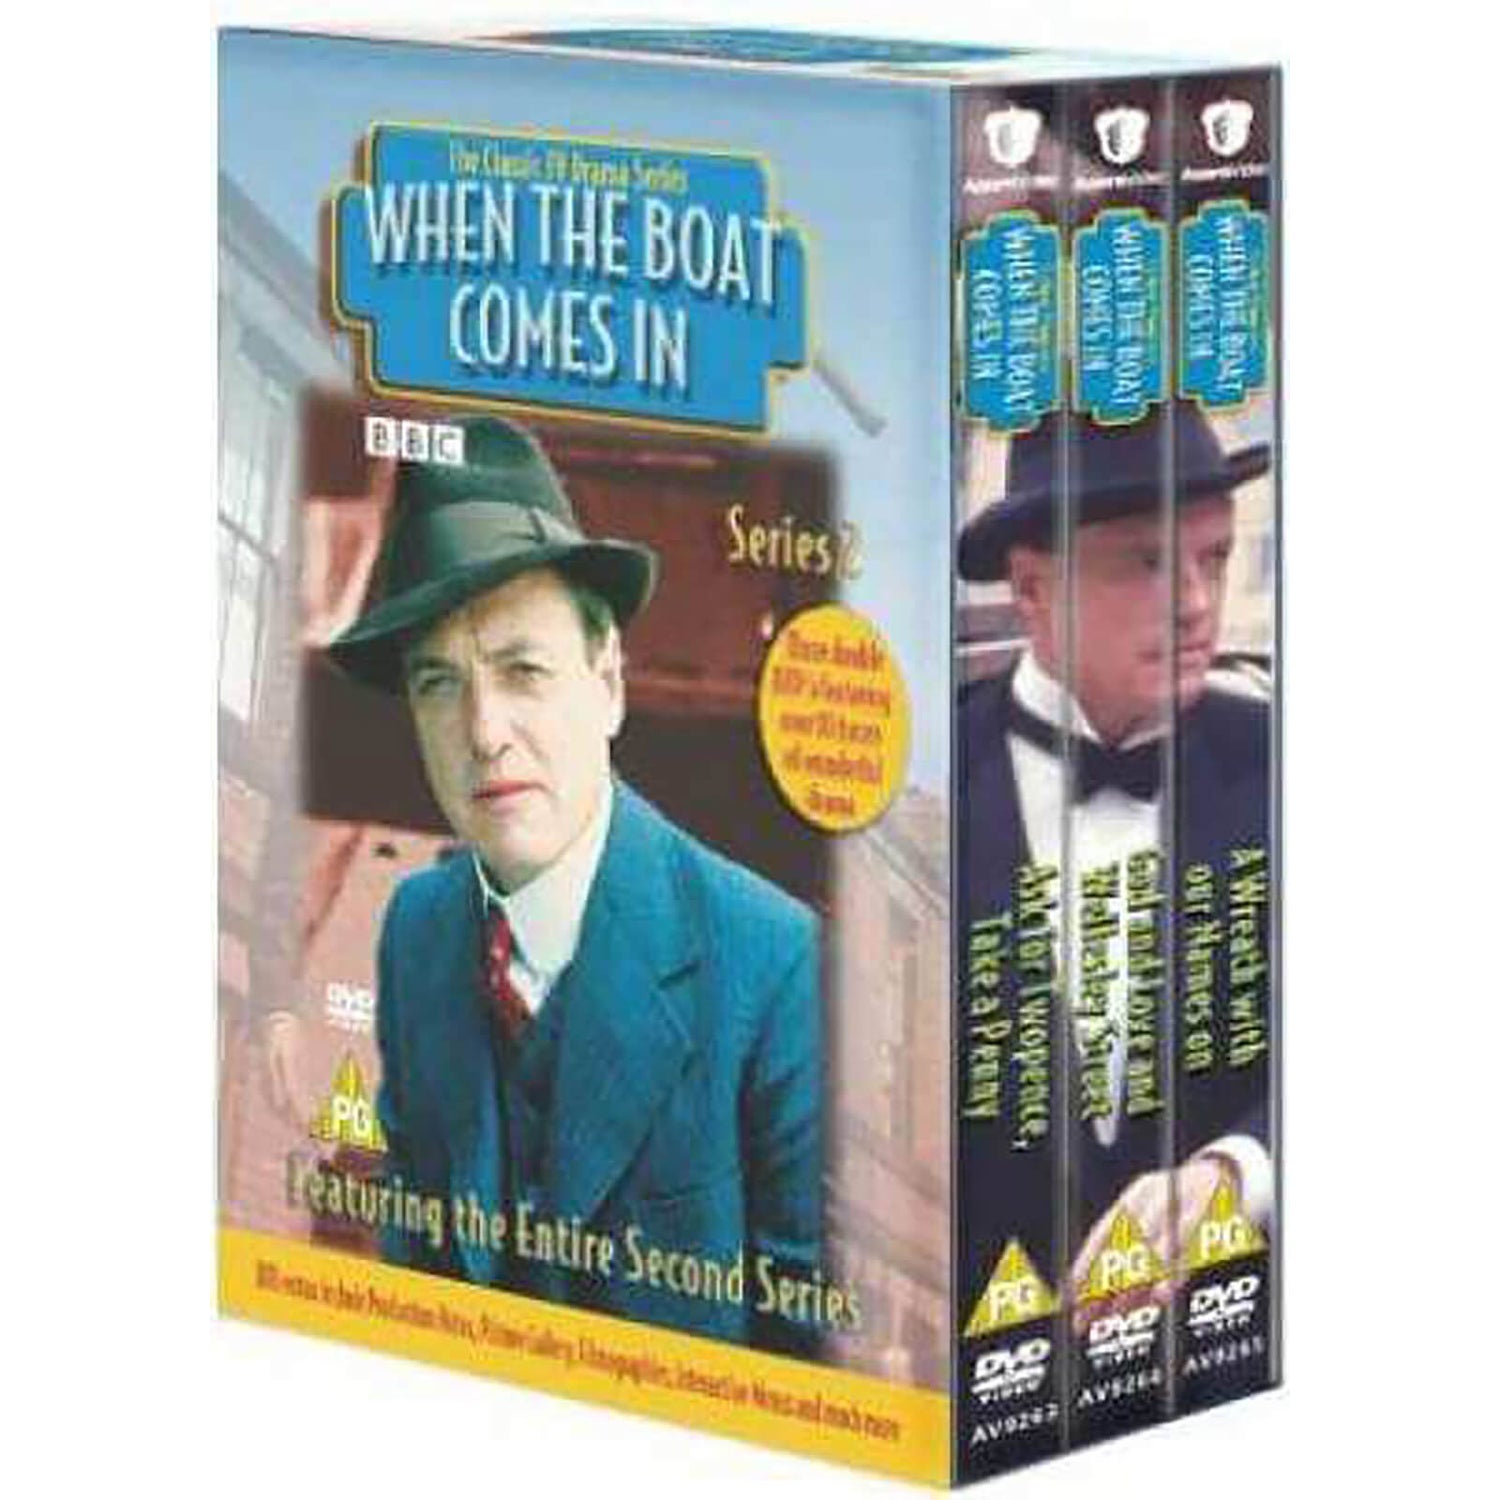 When The Boat Comes In - Series 2 Box Set